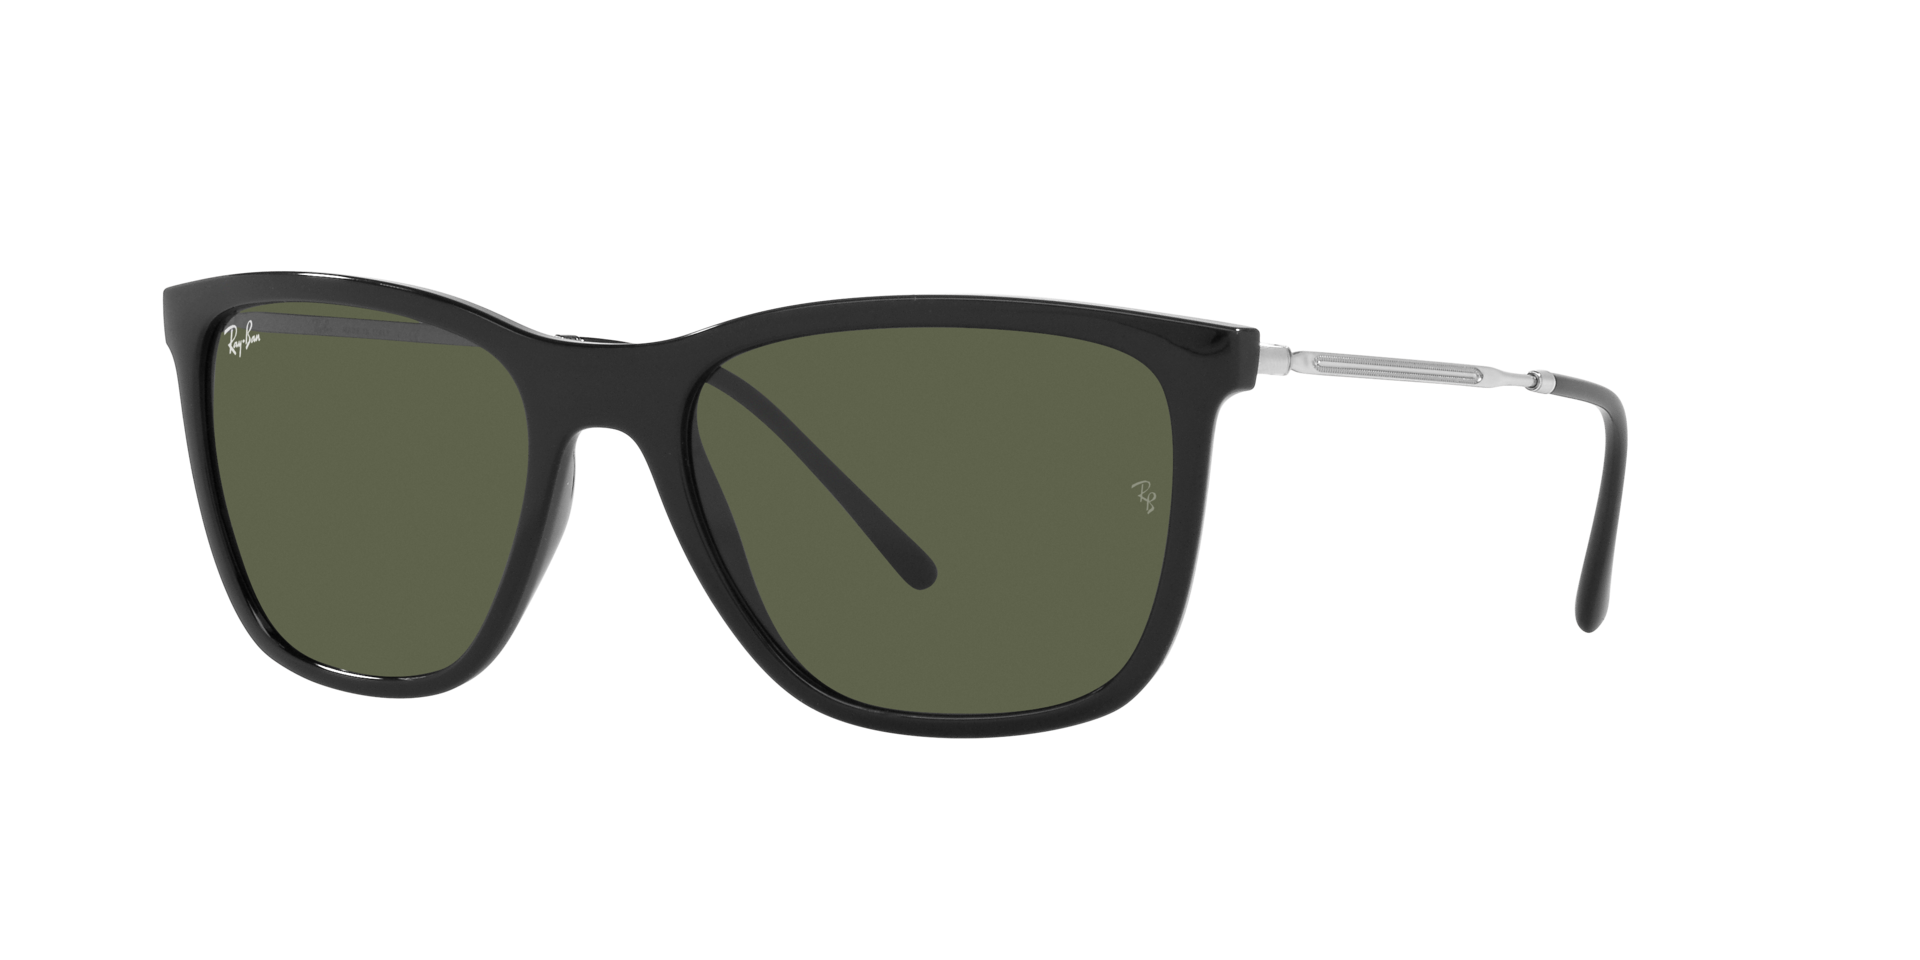 Ray-Ban RB4344 Sunglasses best for round faces